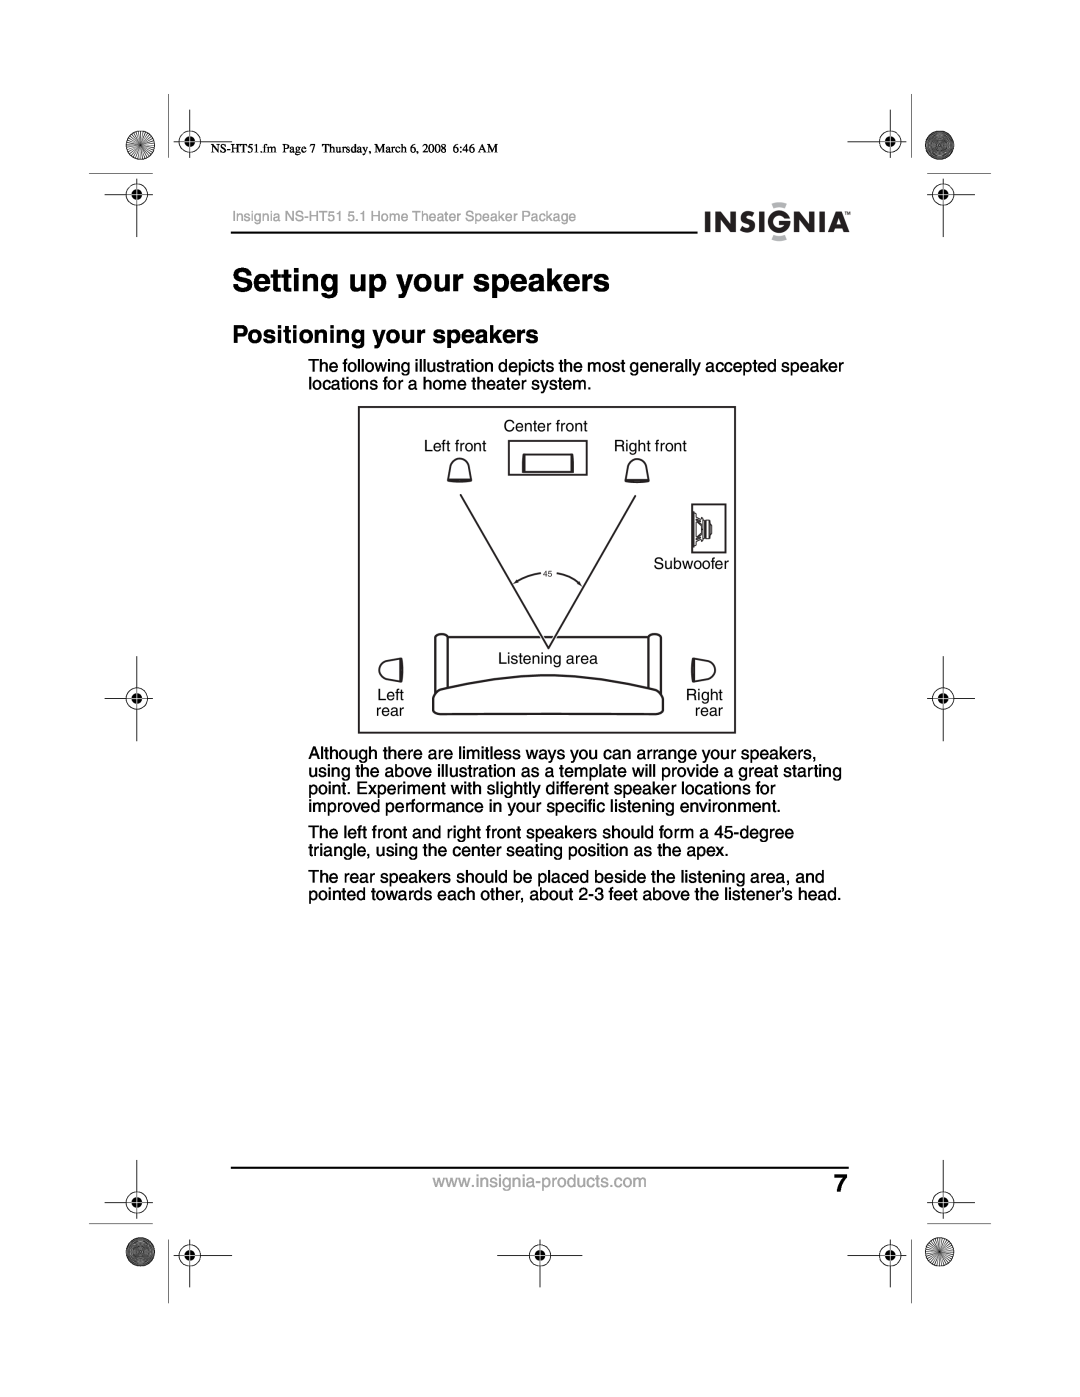 Insignia NS-HT51 manual Setting up your speakers, Positioning your speakers 